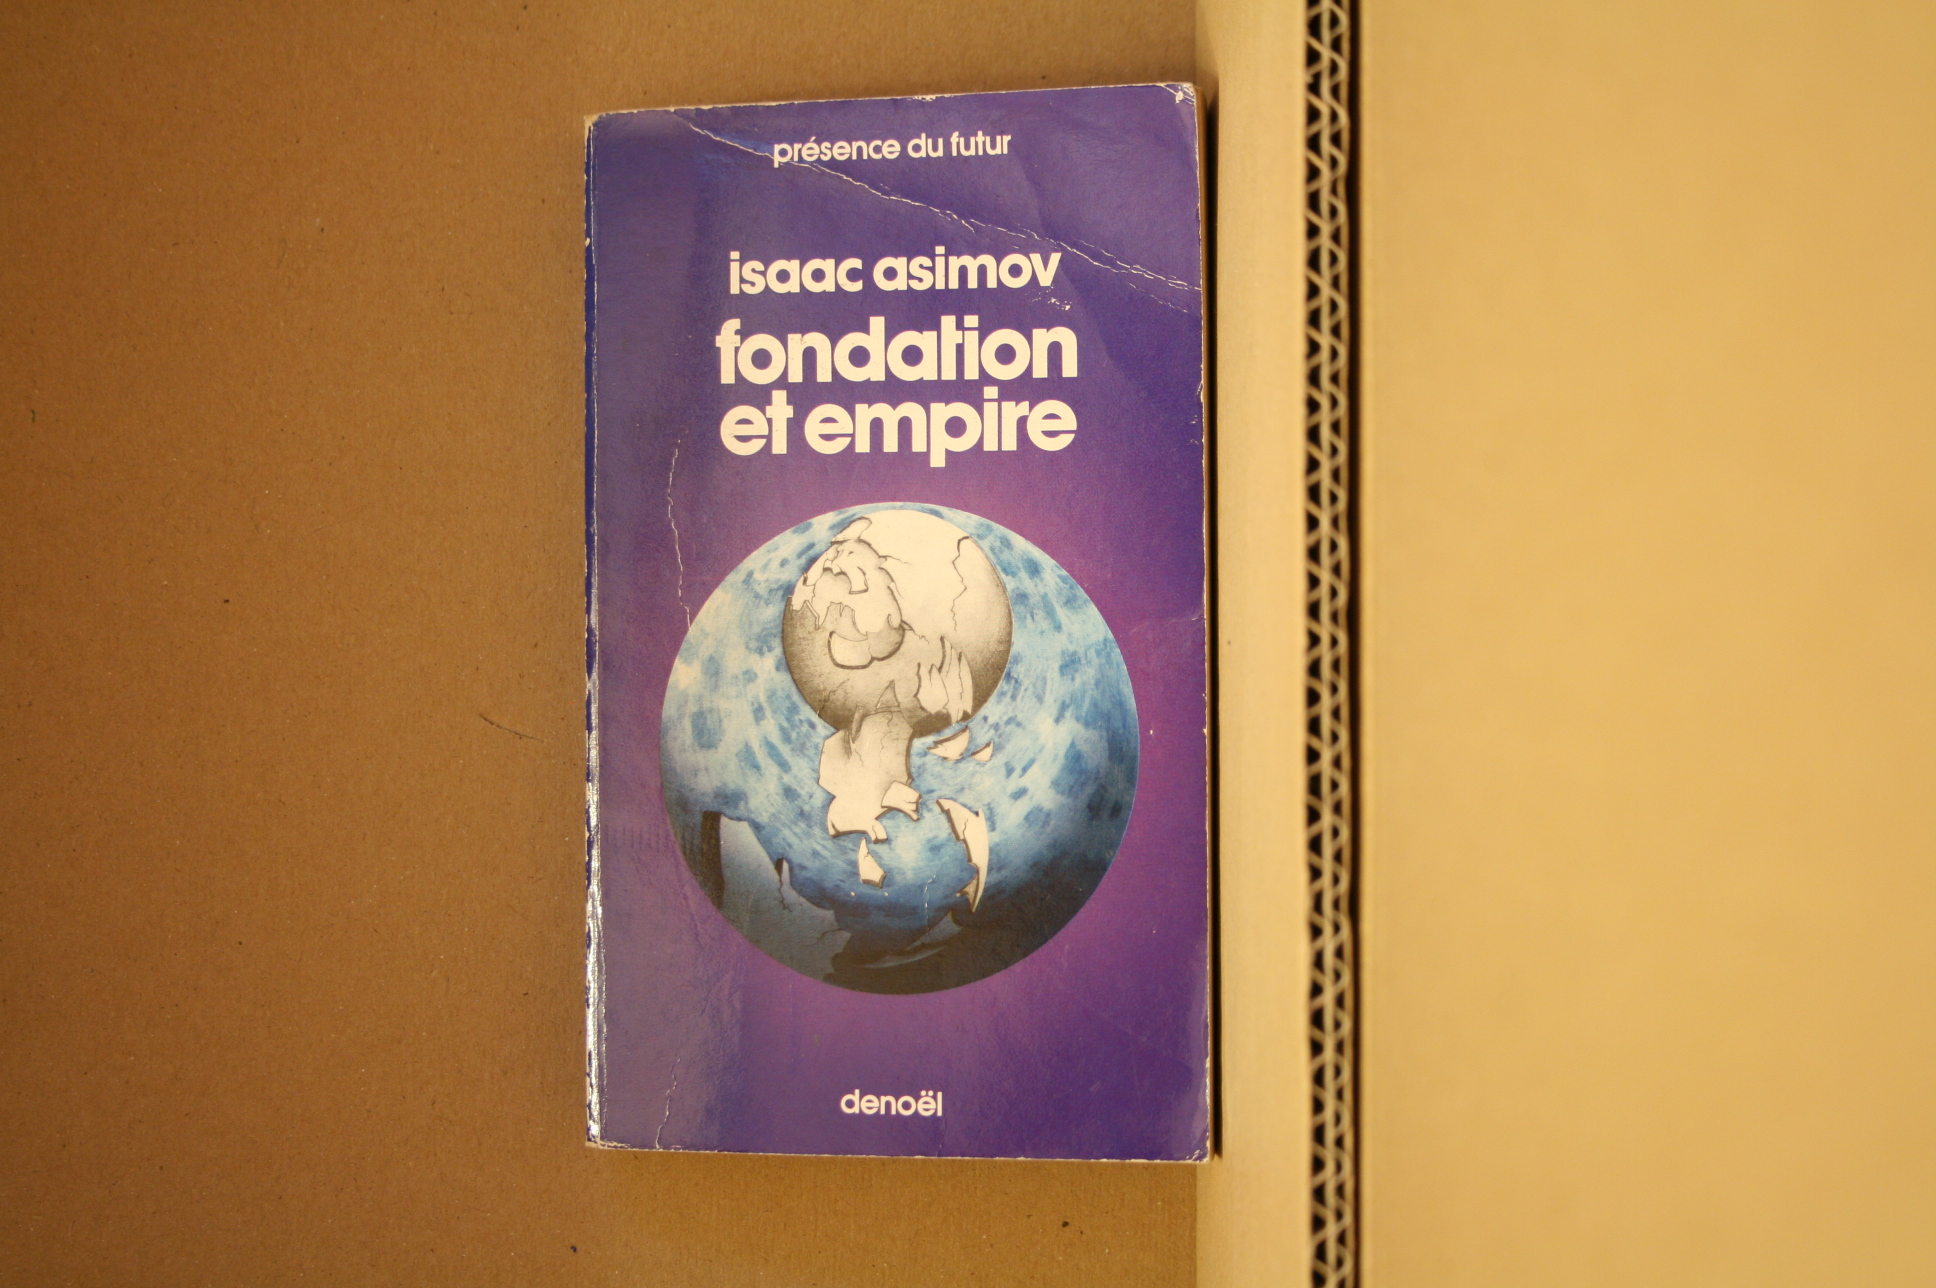 Seconde Fondation by Isaac Asimov